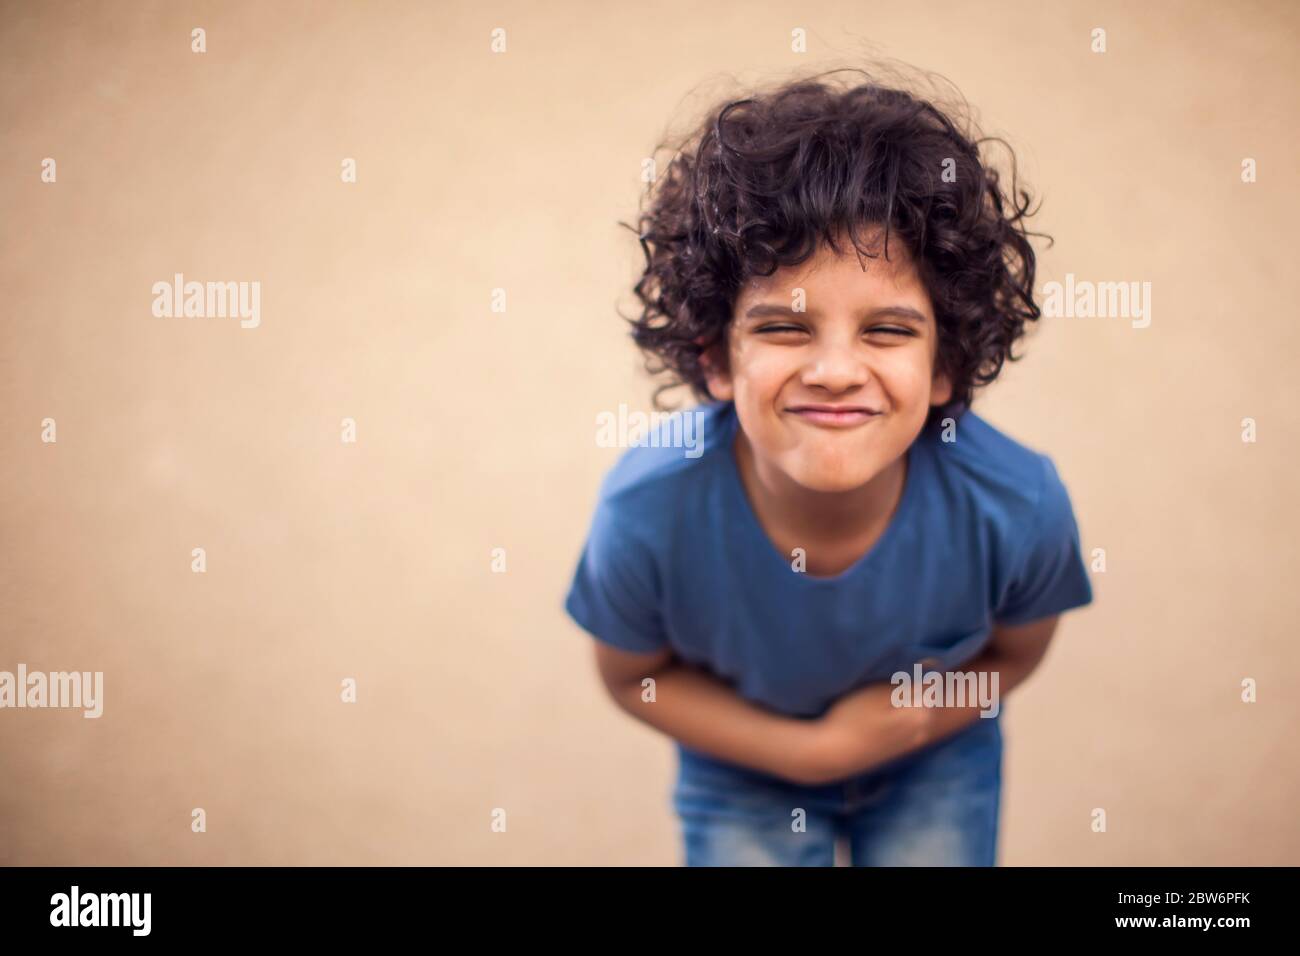 Kid boy feels strong stomach ache. Children, healthcare and medicine concept Stock Photo